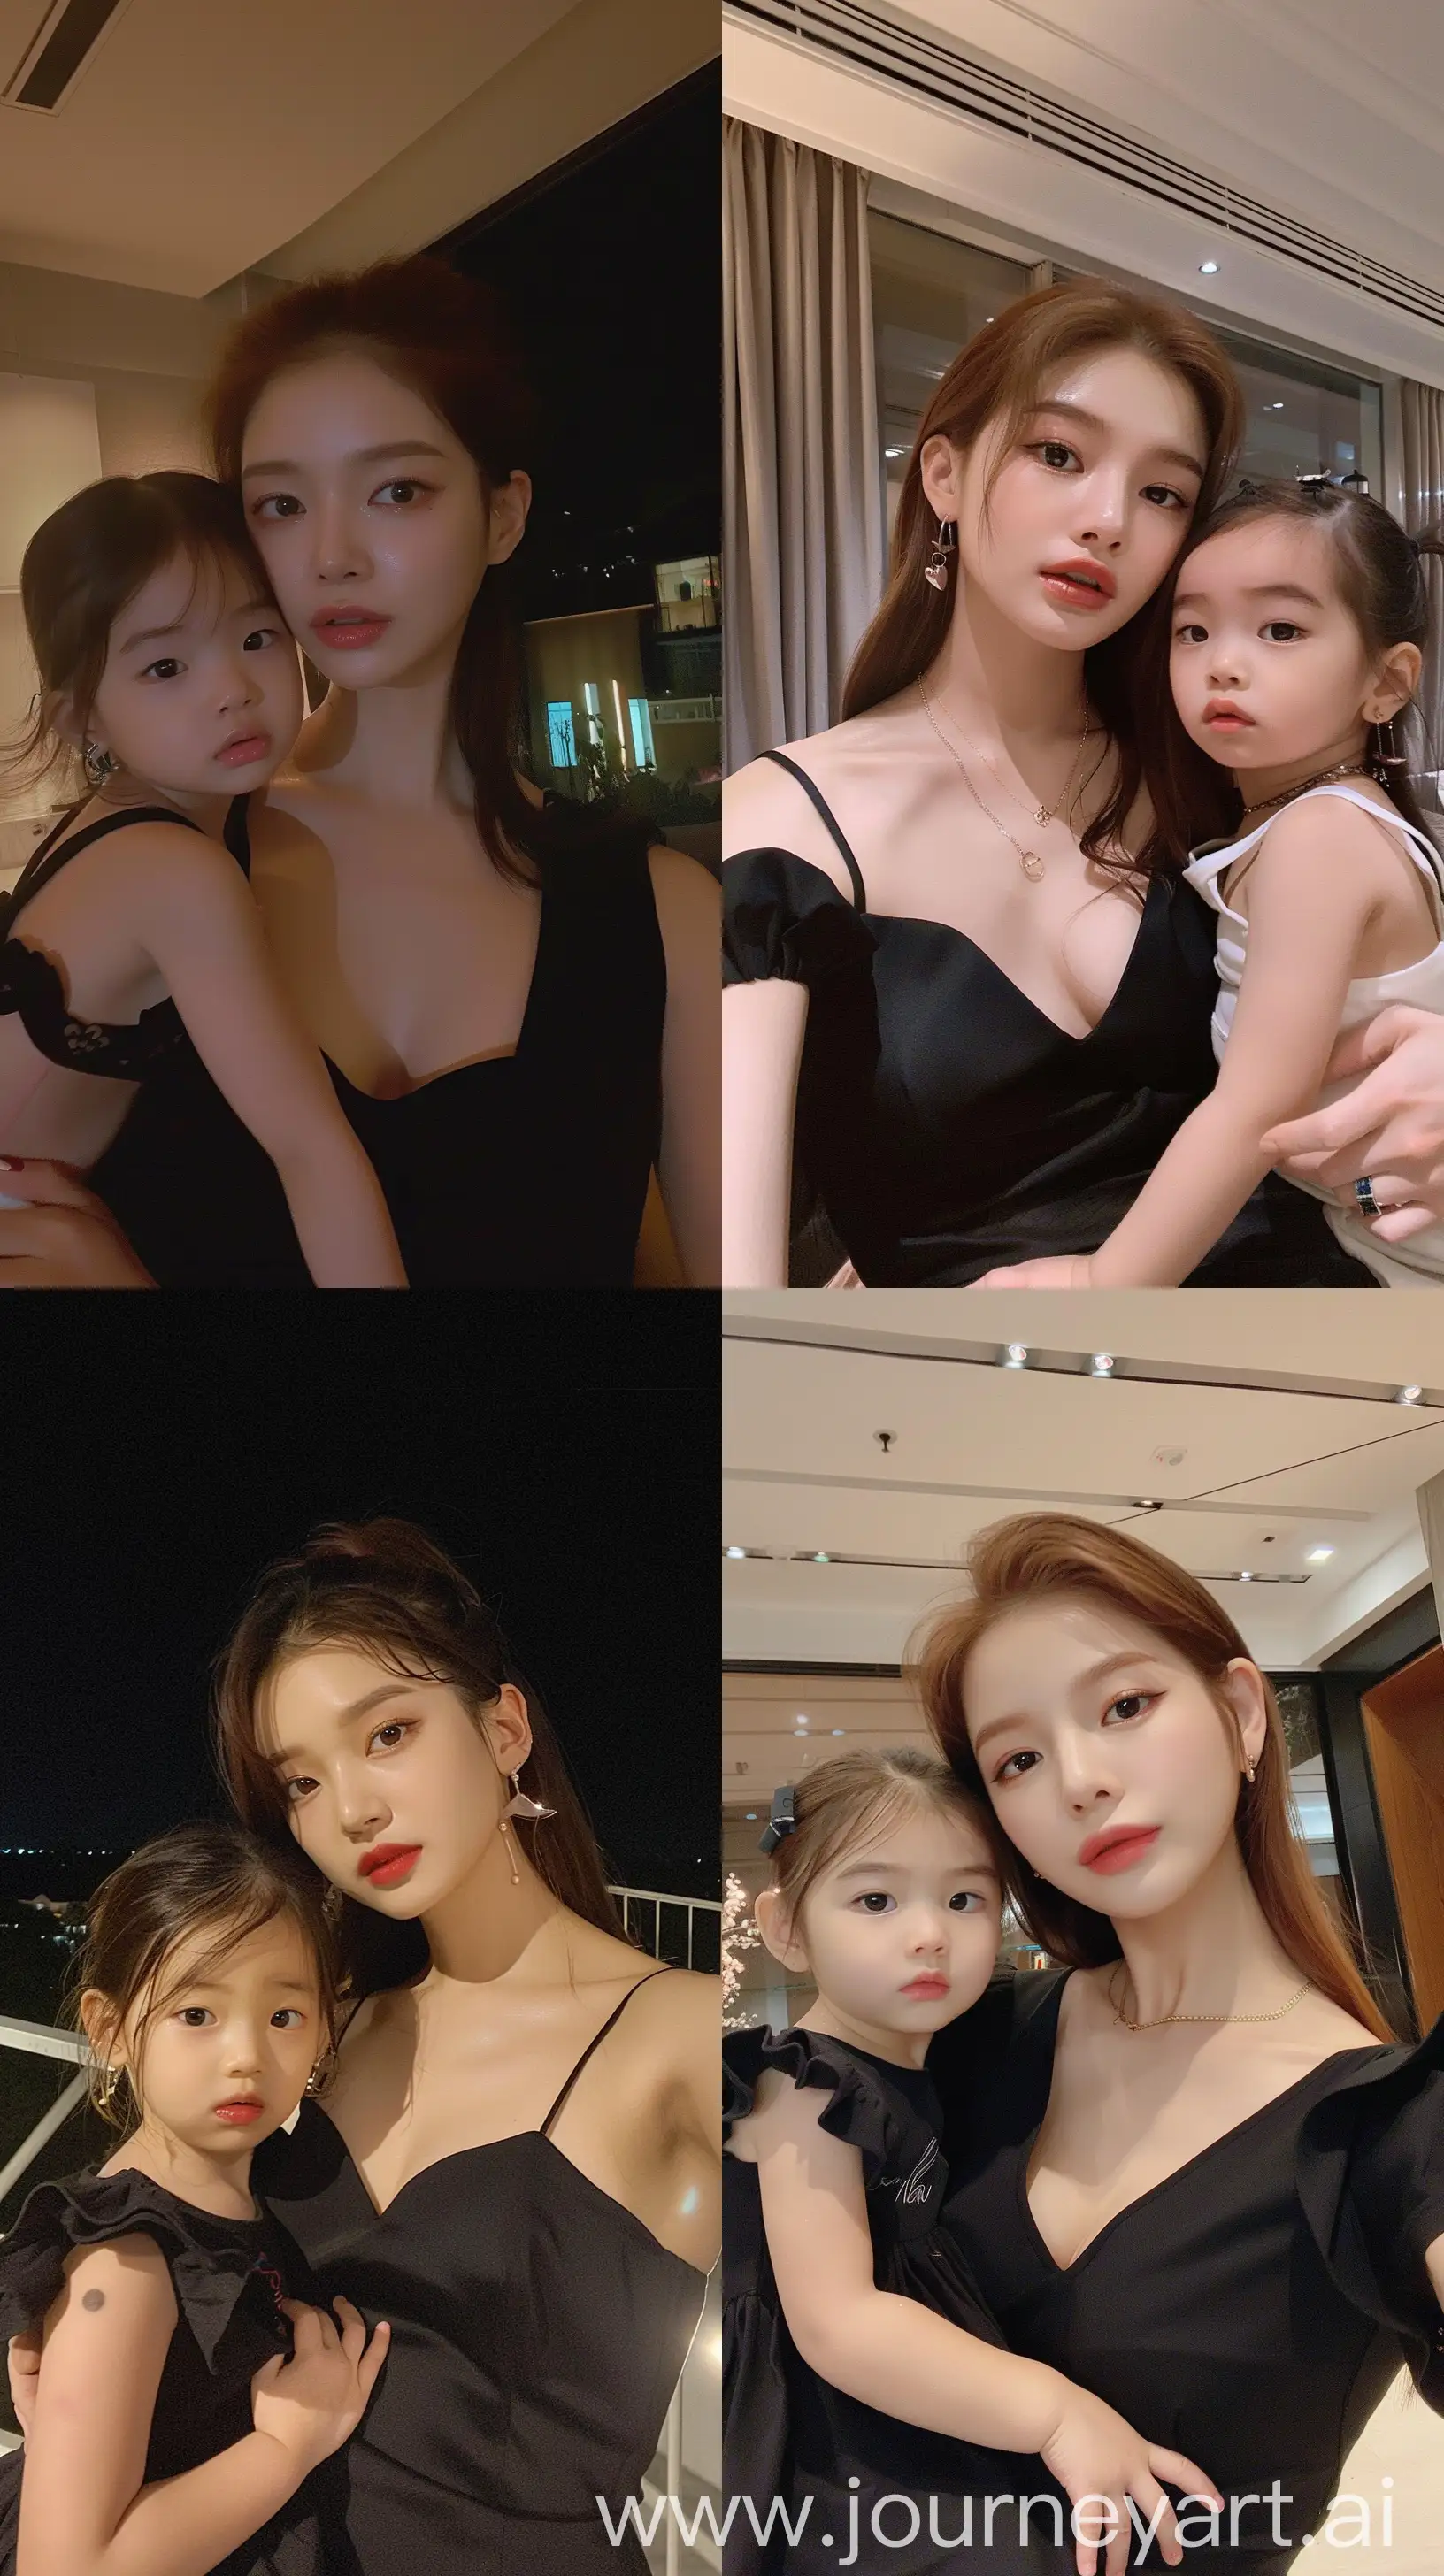 blackpink's jennie selfie with 2 years old  girl, facial feature look a like blackpink's jennie, aestethic selfie, wearing black dress, night times, aestethic make up,hotly elegant young mom, casual simple look --ar 9:16 